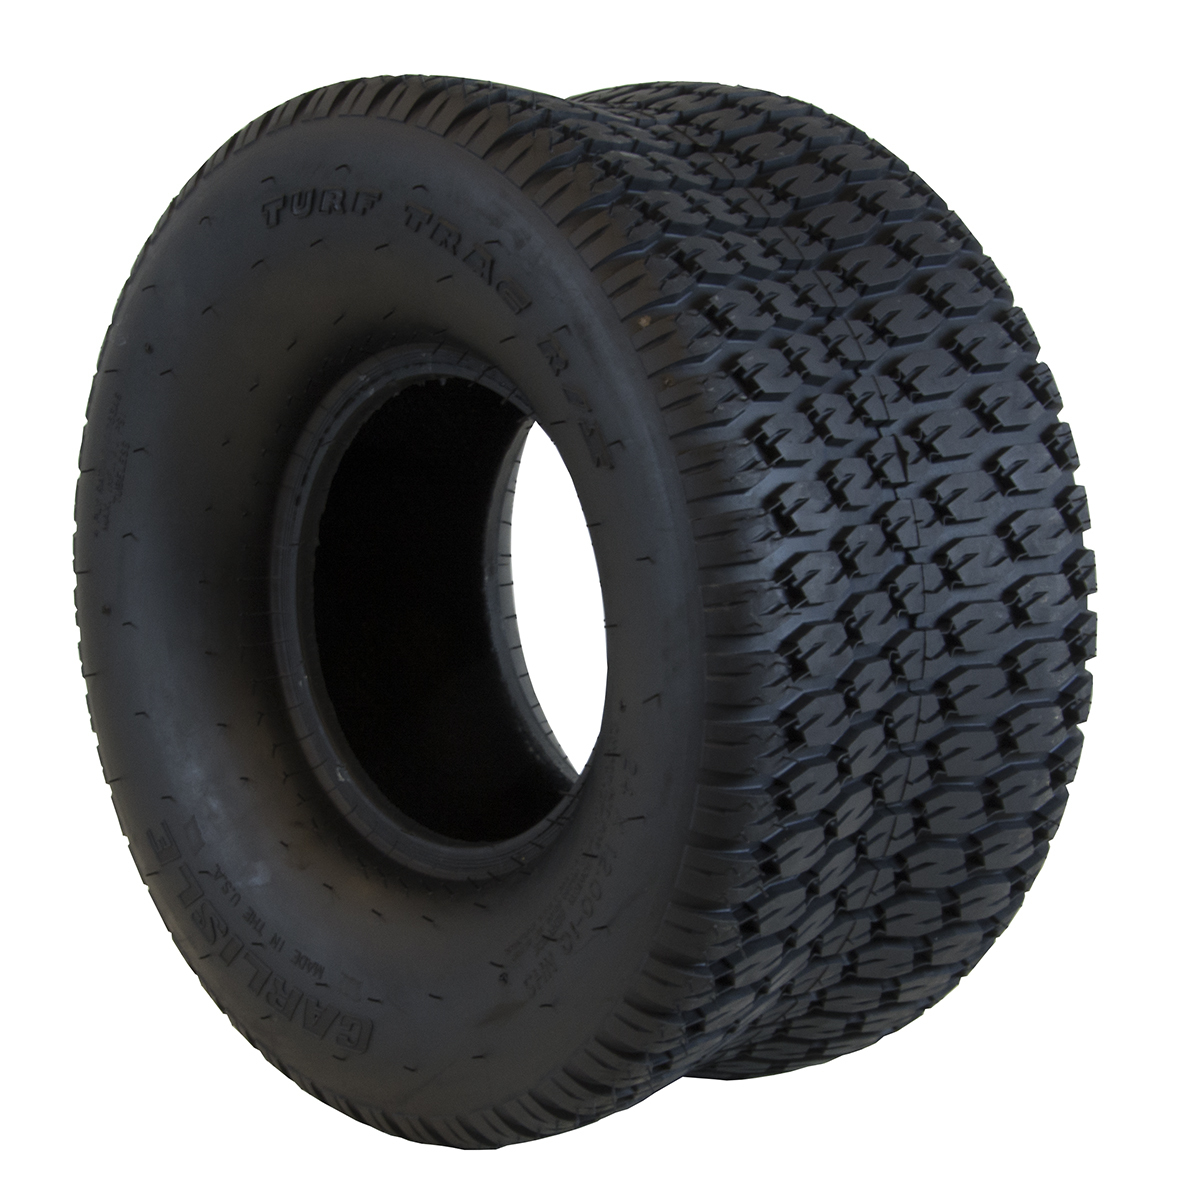 Rear Tire for HPX and TX Gators